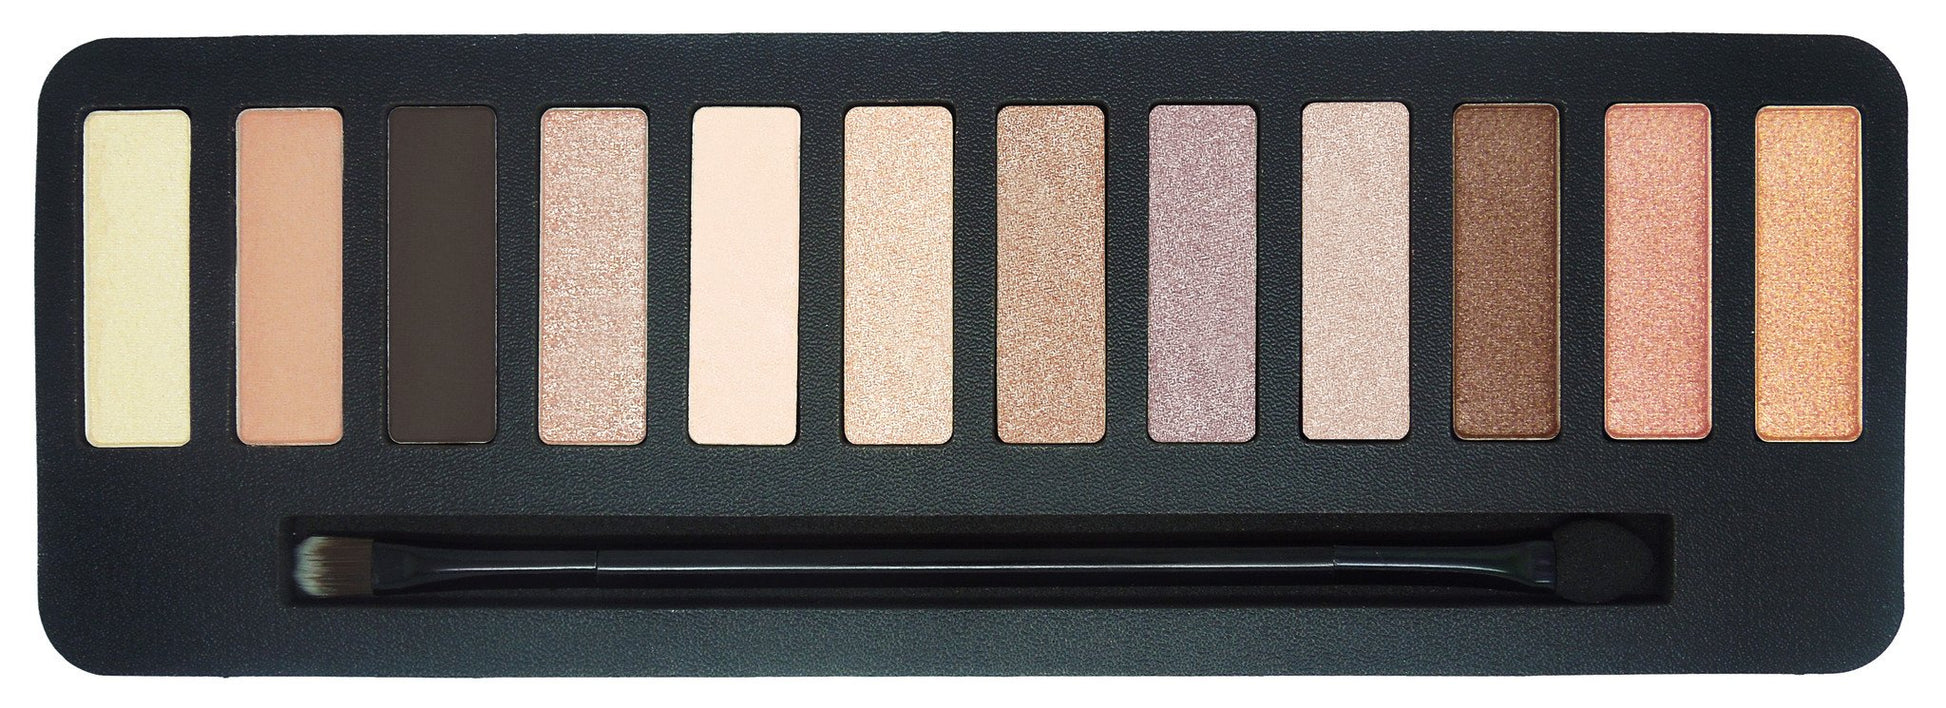 W7 COSMETICS, Beat It, Natural Nudes, 12 in 1 Eyeshadow Palette - ADDROS.COM